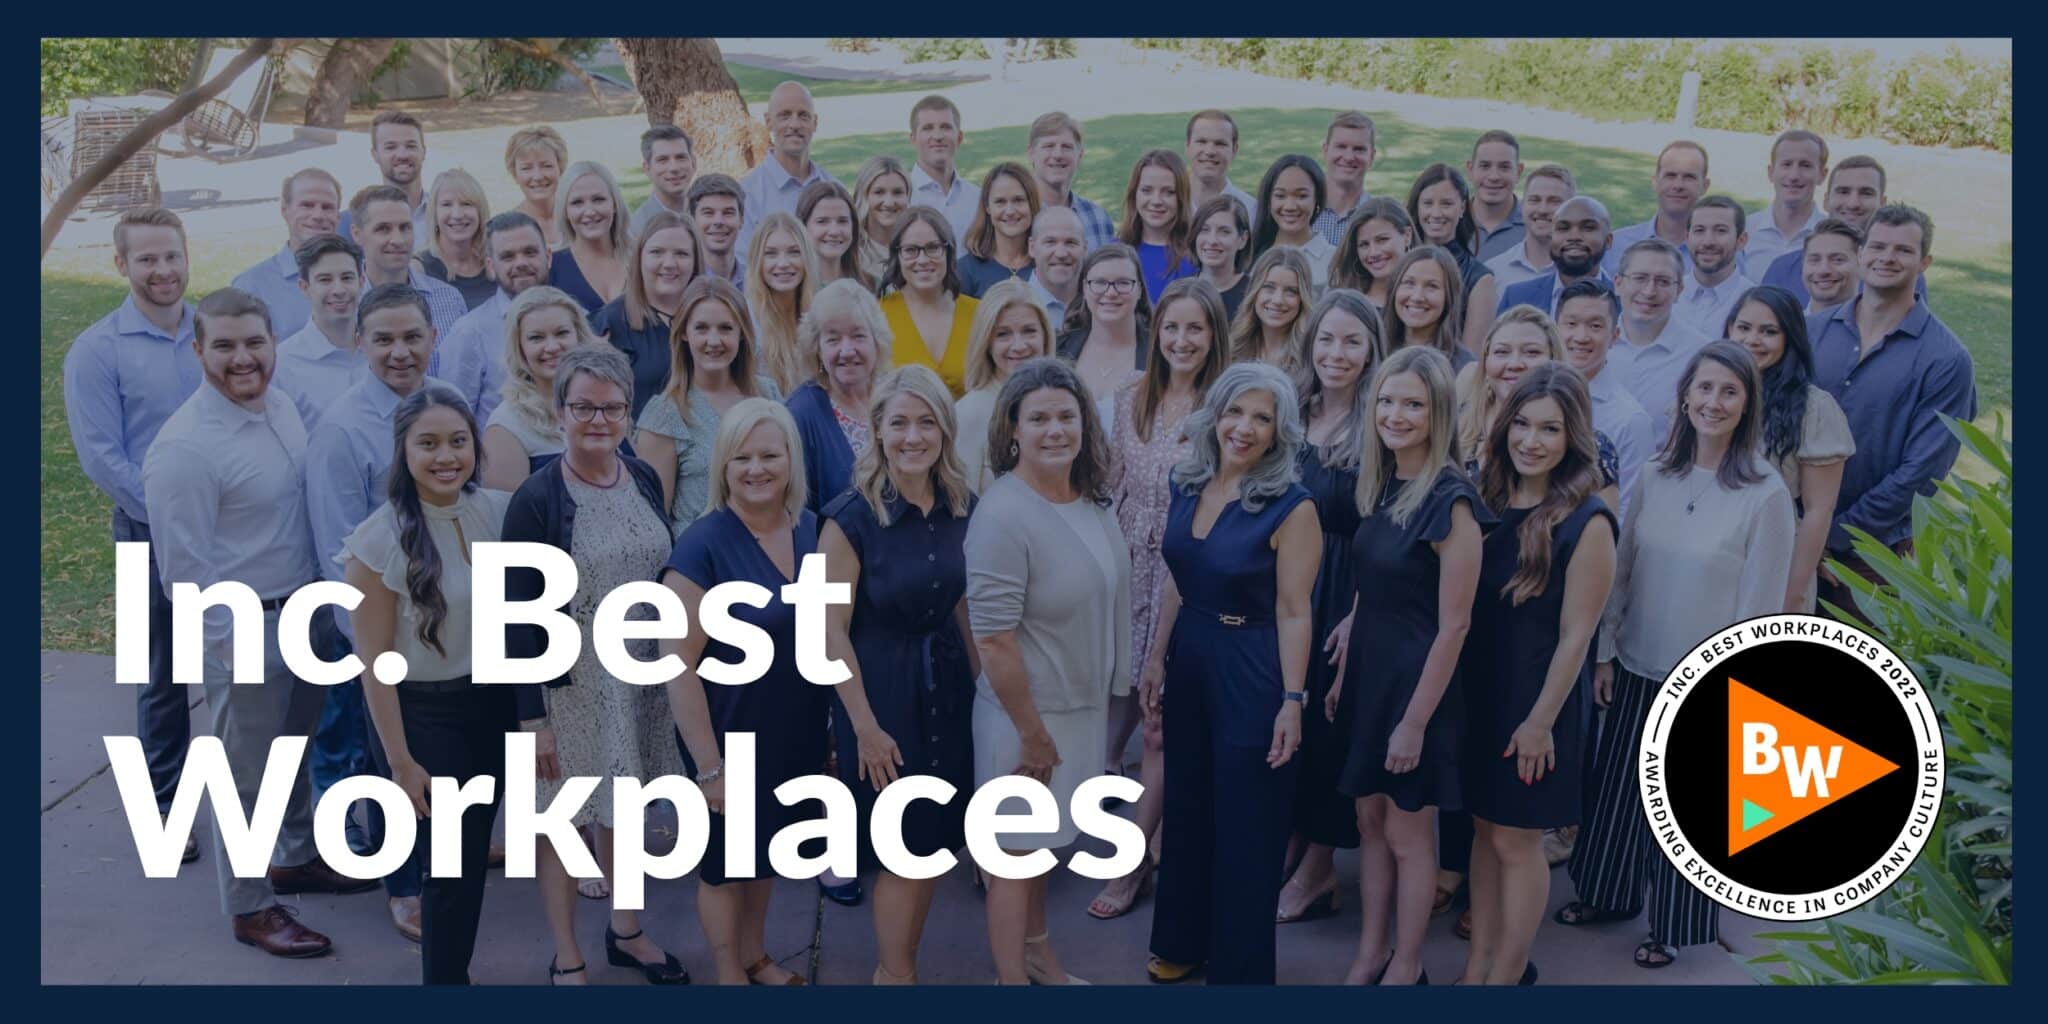 Mission Wealth Listed on Inc. Magazine’s 2022 Best Workplaces